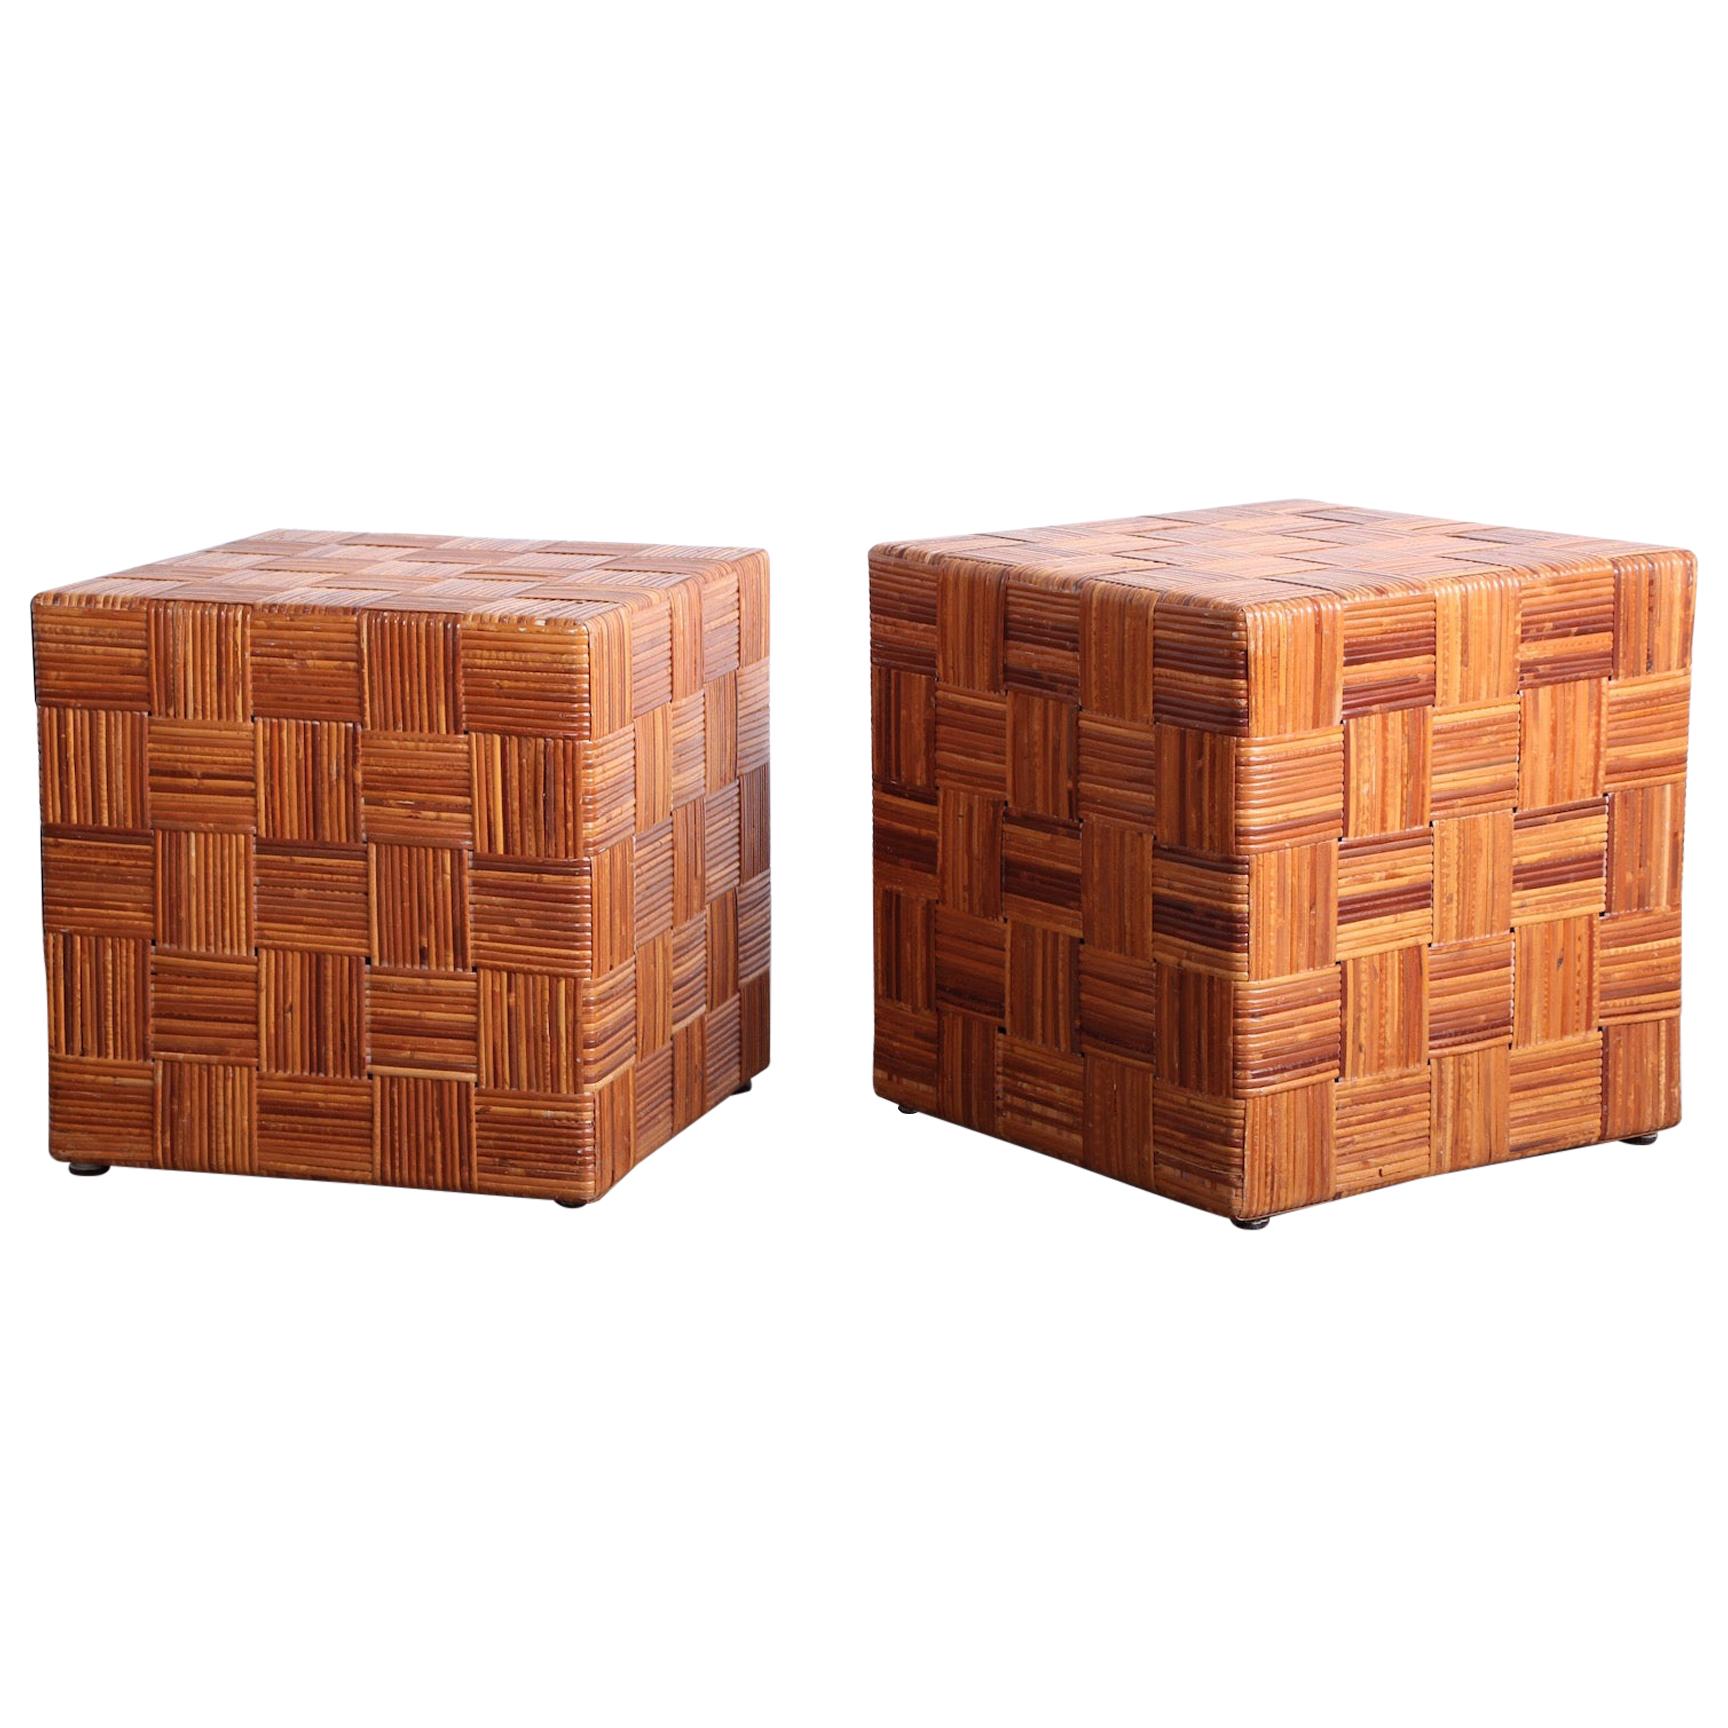 Pair of Woven Cane Cubes by Harvey Probber